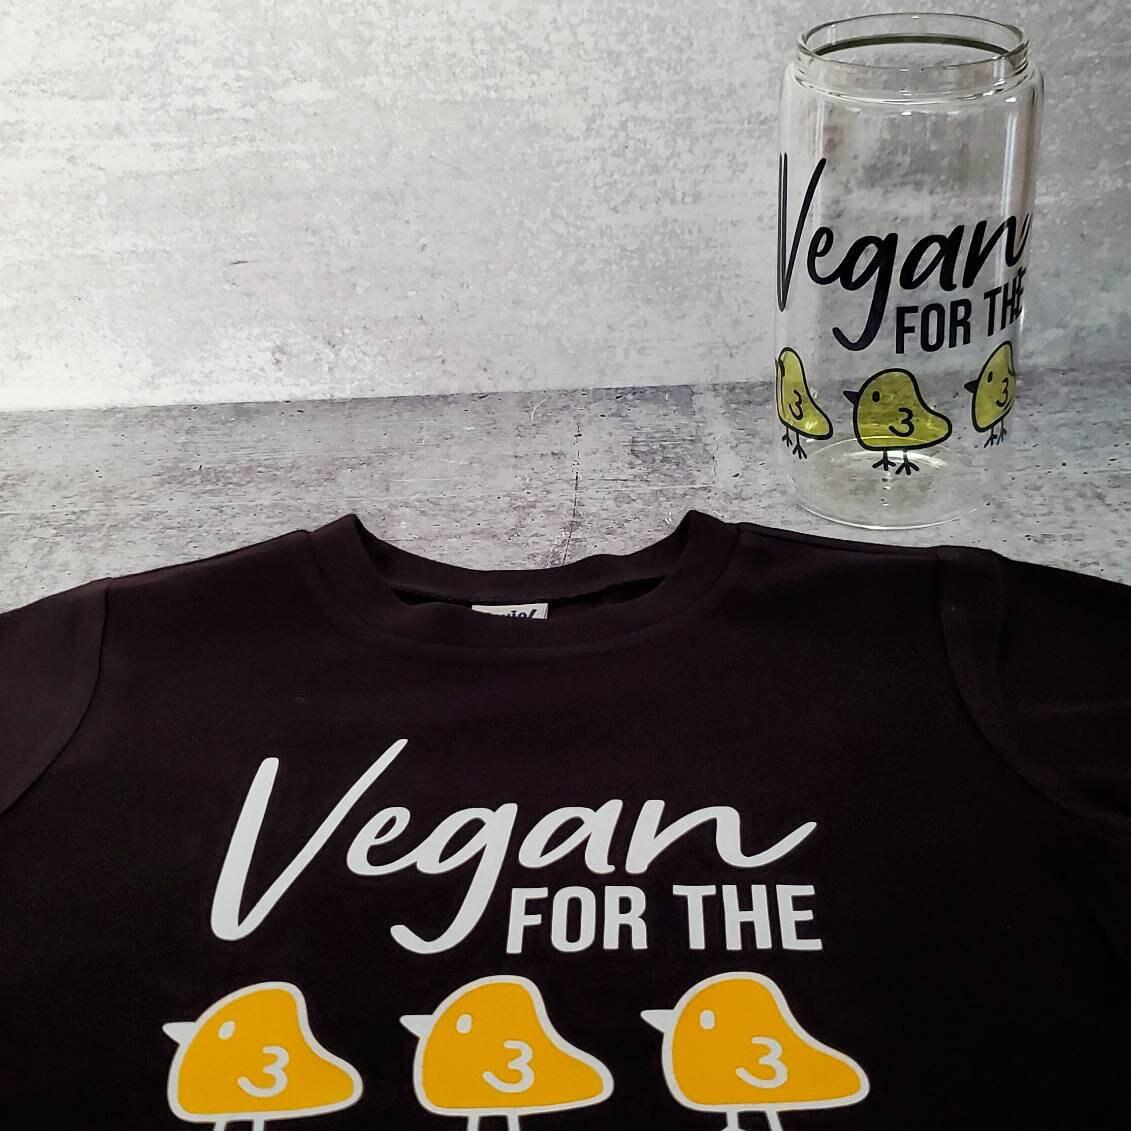 Vegan Daddy and Me Gift Set - Vegan for the Chicks Father's Day Gift - Daddy and Son Matching Set - Gift for Vegan Family - Toddler and Dad